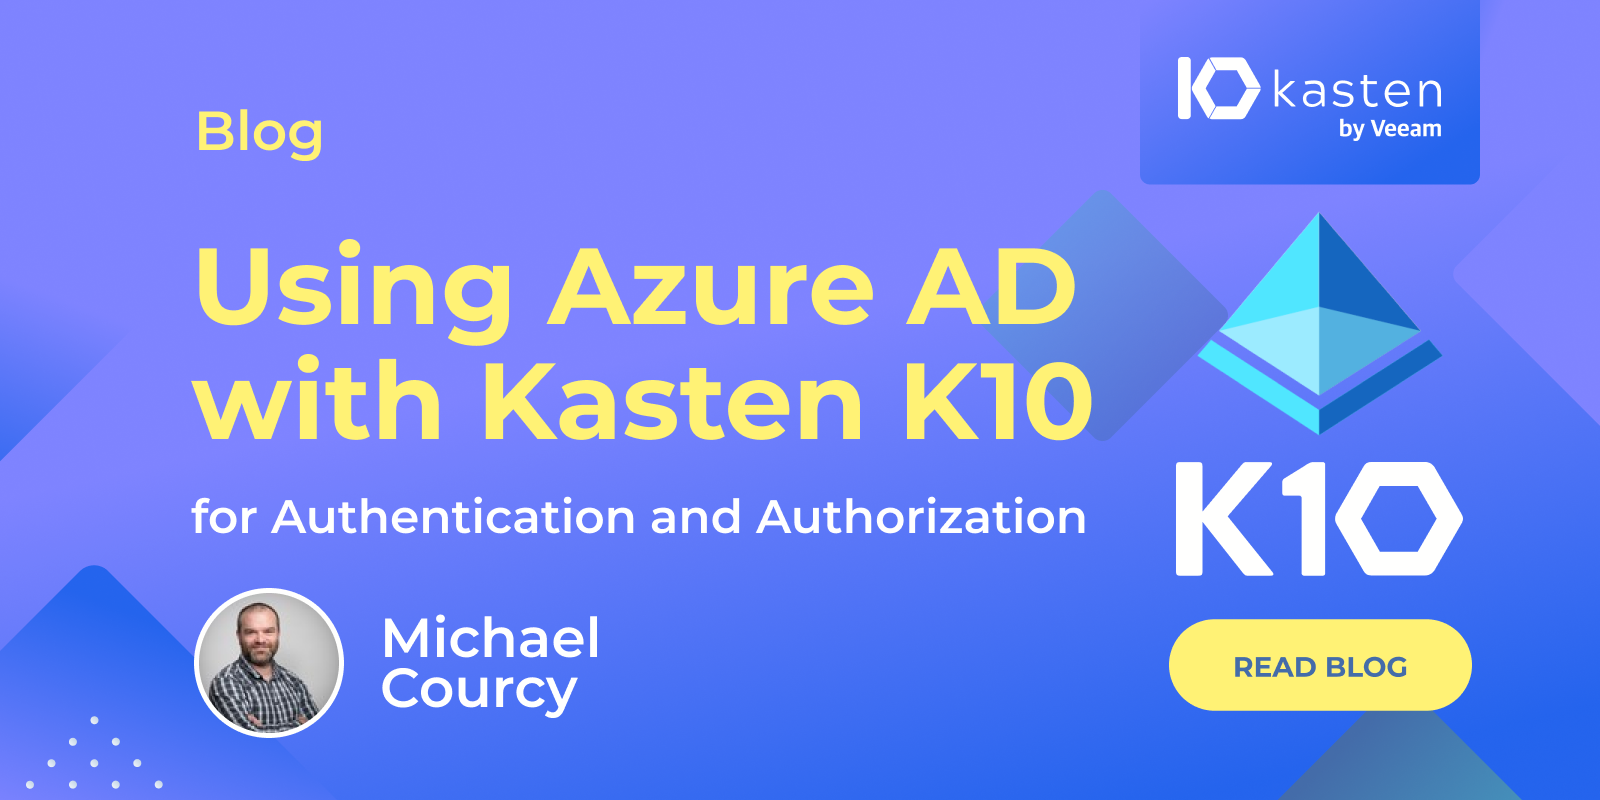 Azure Active Directory (Azure AD) to manage authentication